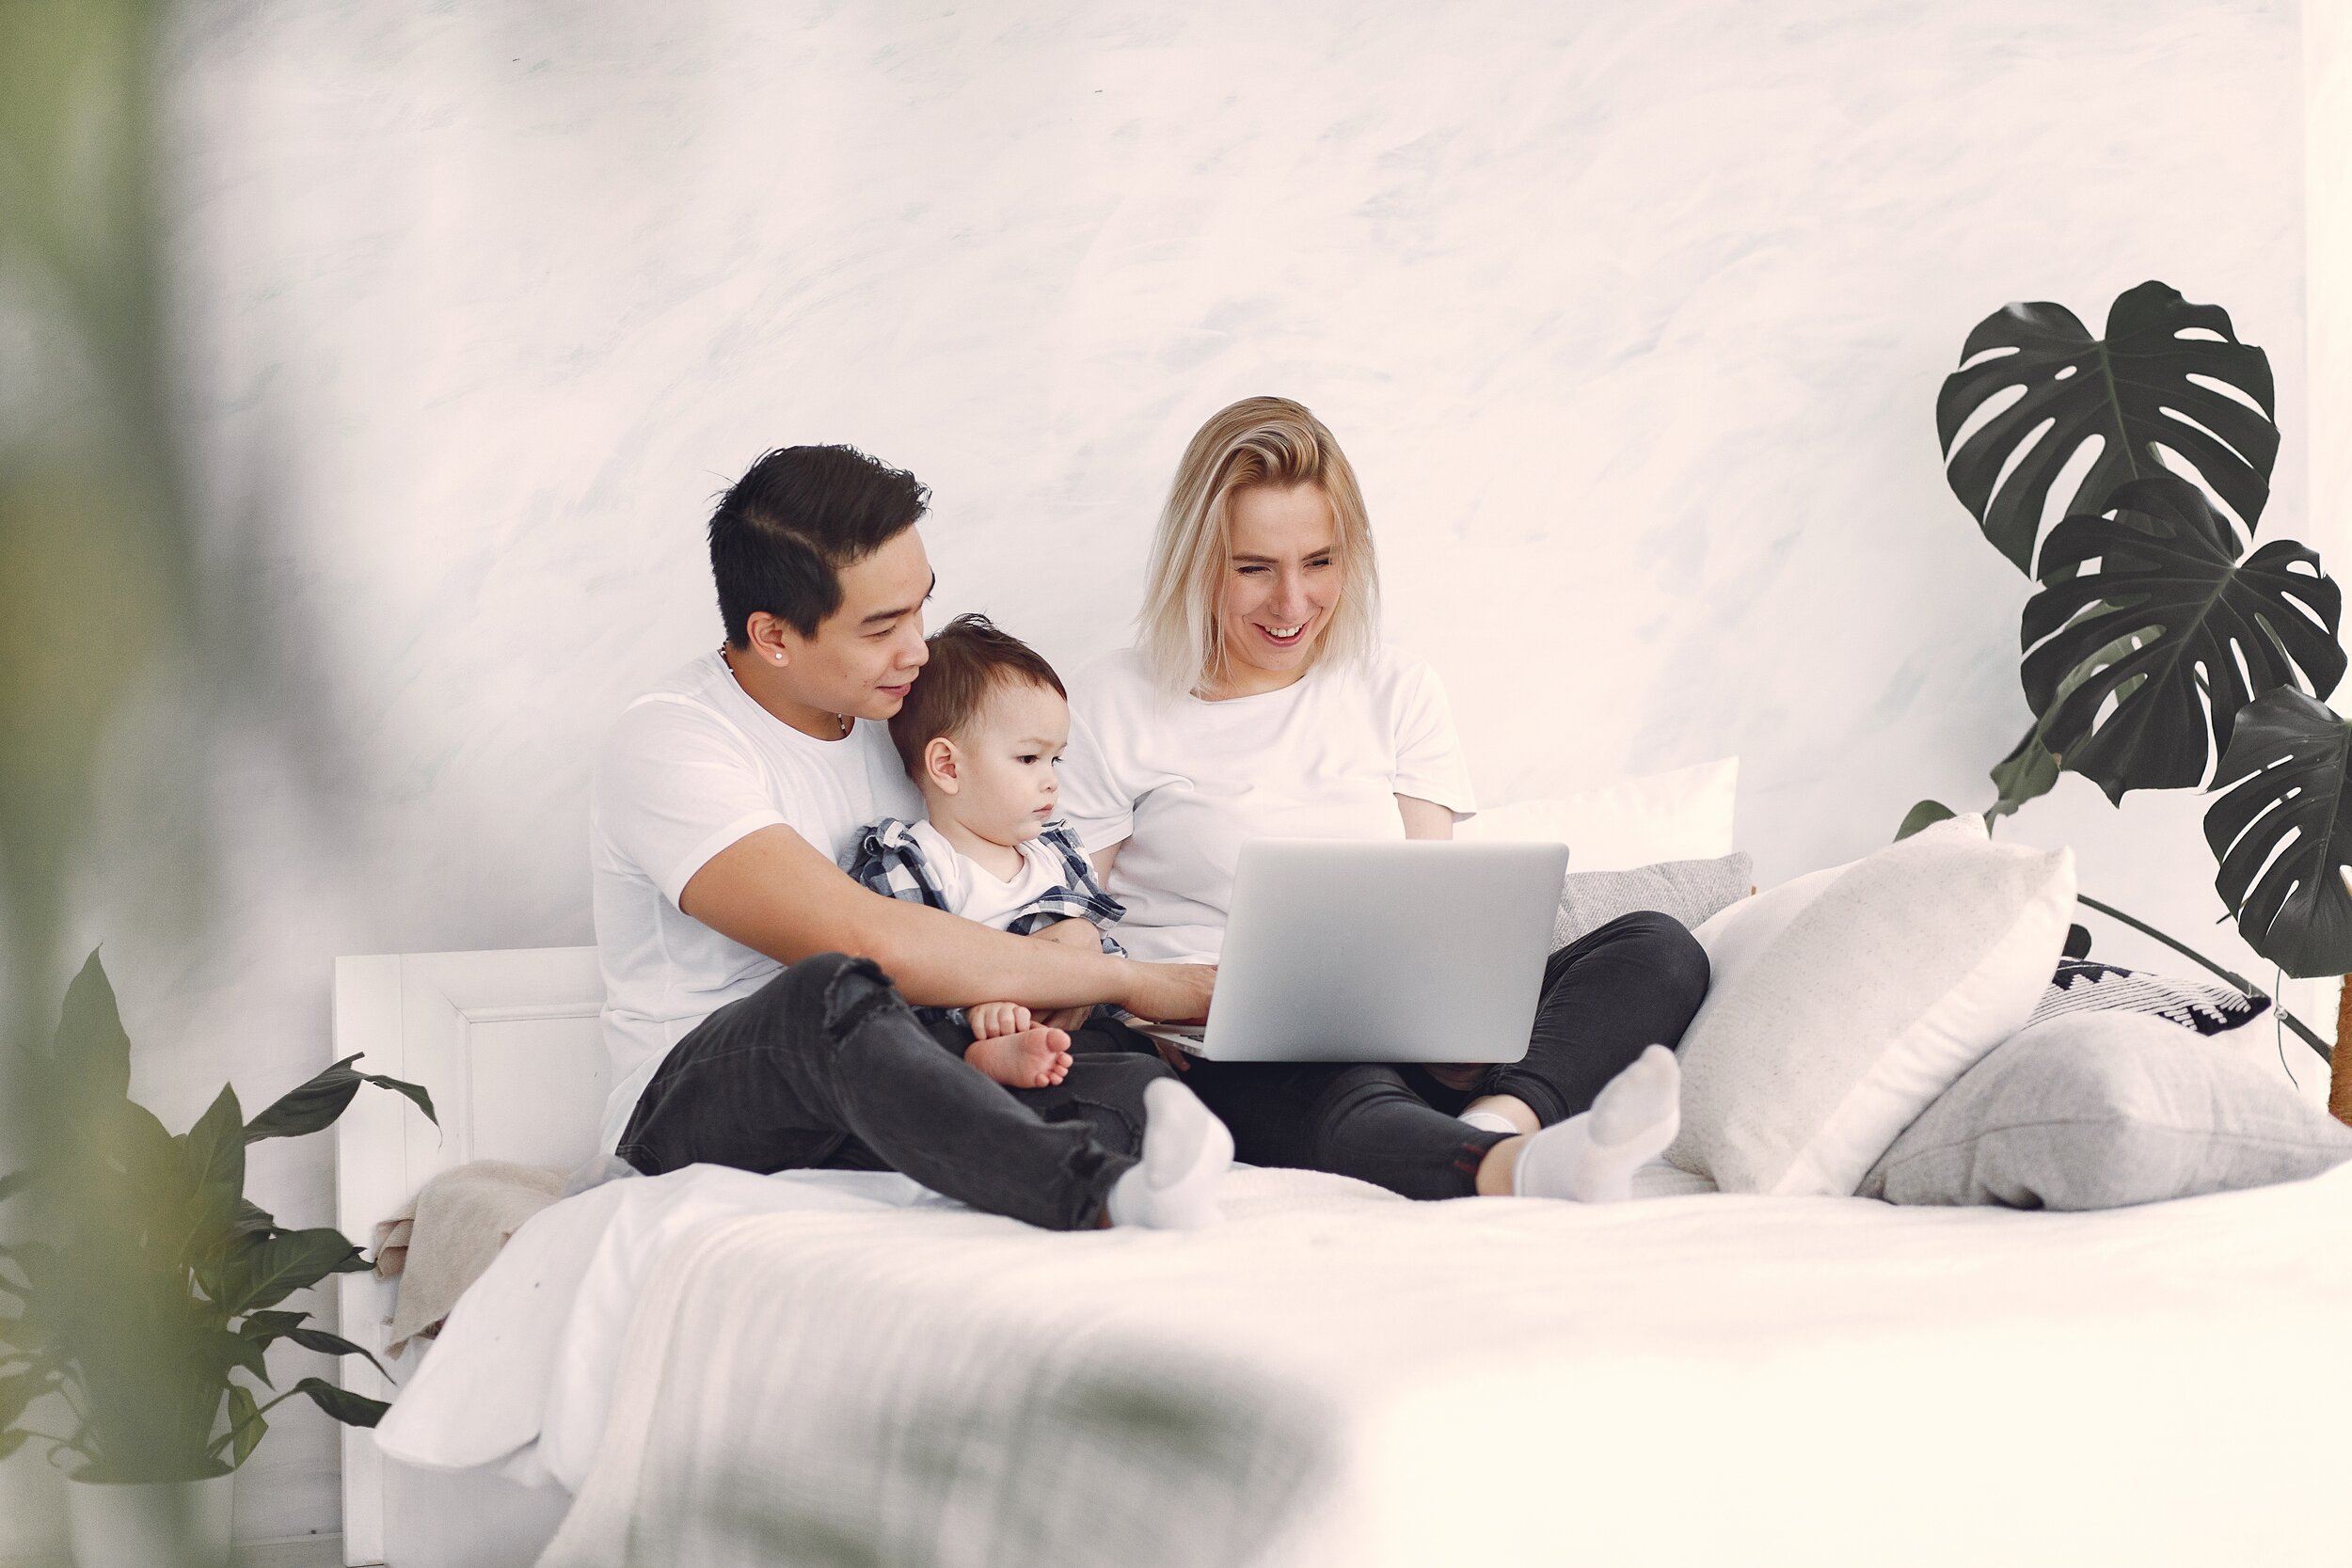 man-and-woman-sitting-on-white-bed-using-laptop-computer-3912387.jpg